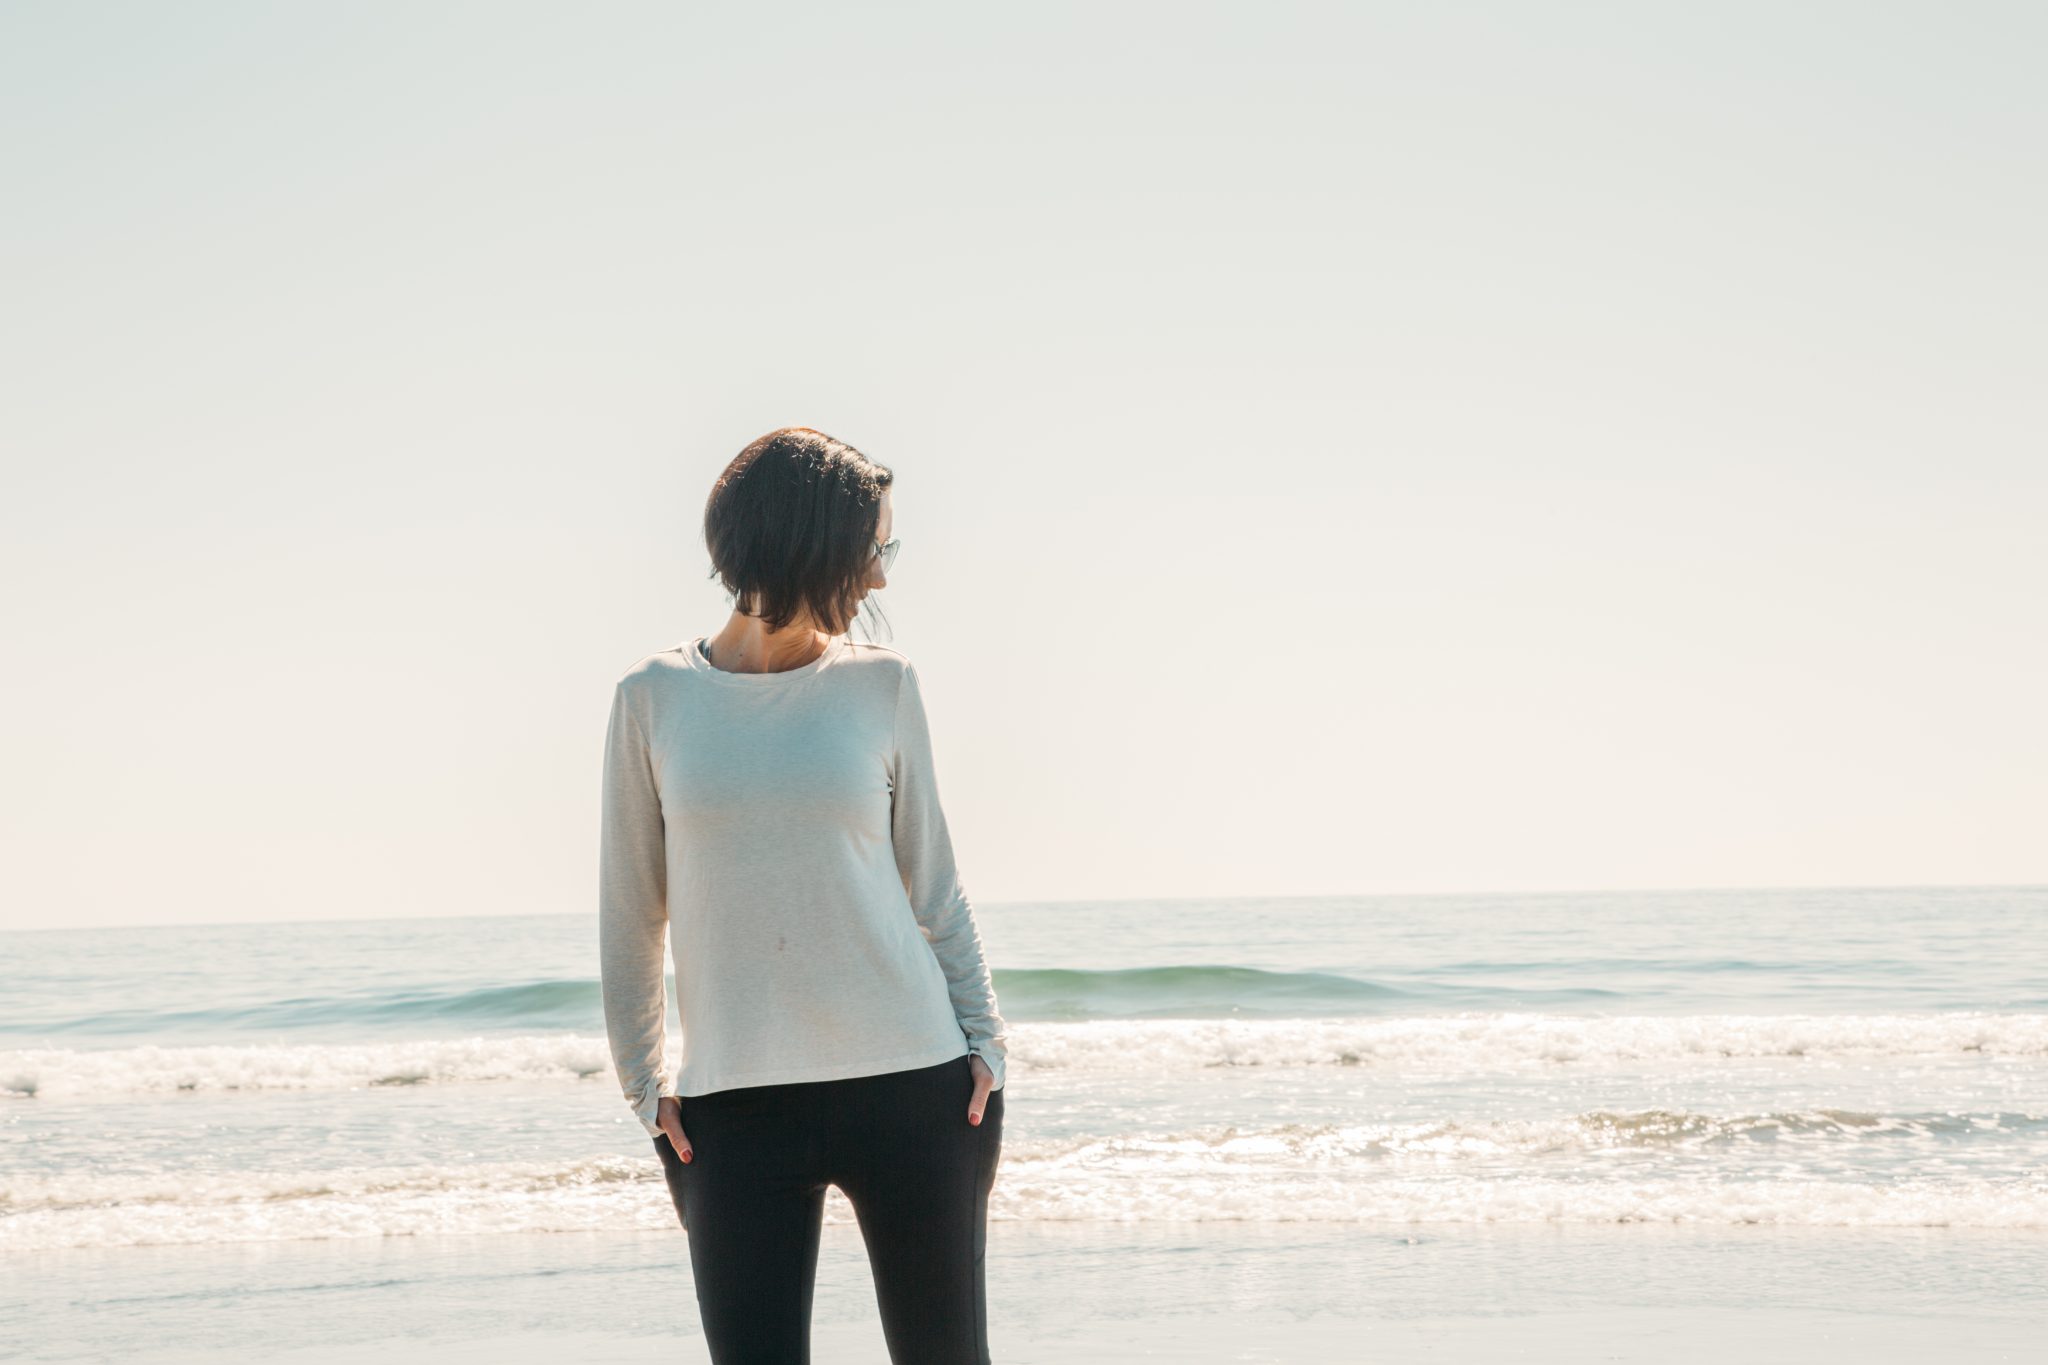 A woman poses on a beach in front of the ocean with waves cresting behind her. She's wearing a long-sleeved white shirt and black leggings from sustainable travel clothing brands.